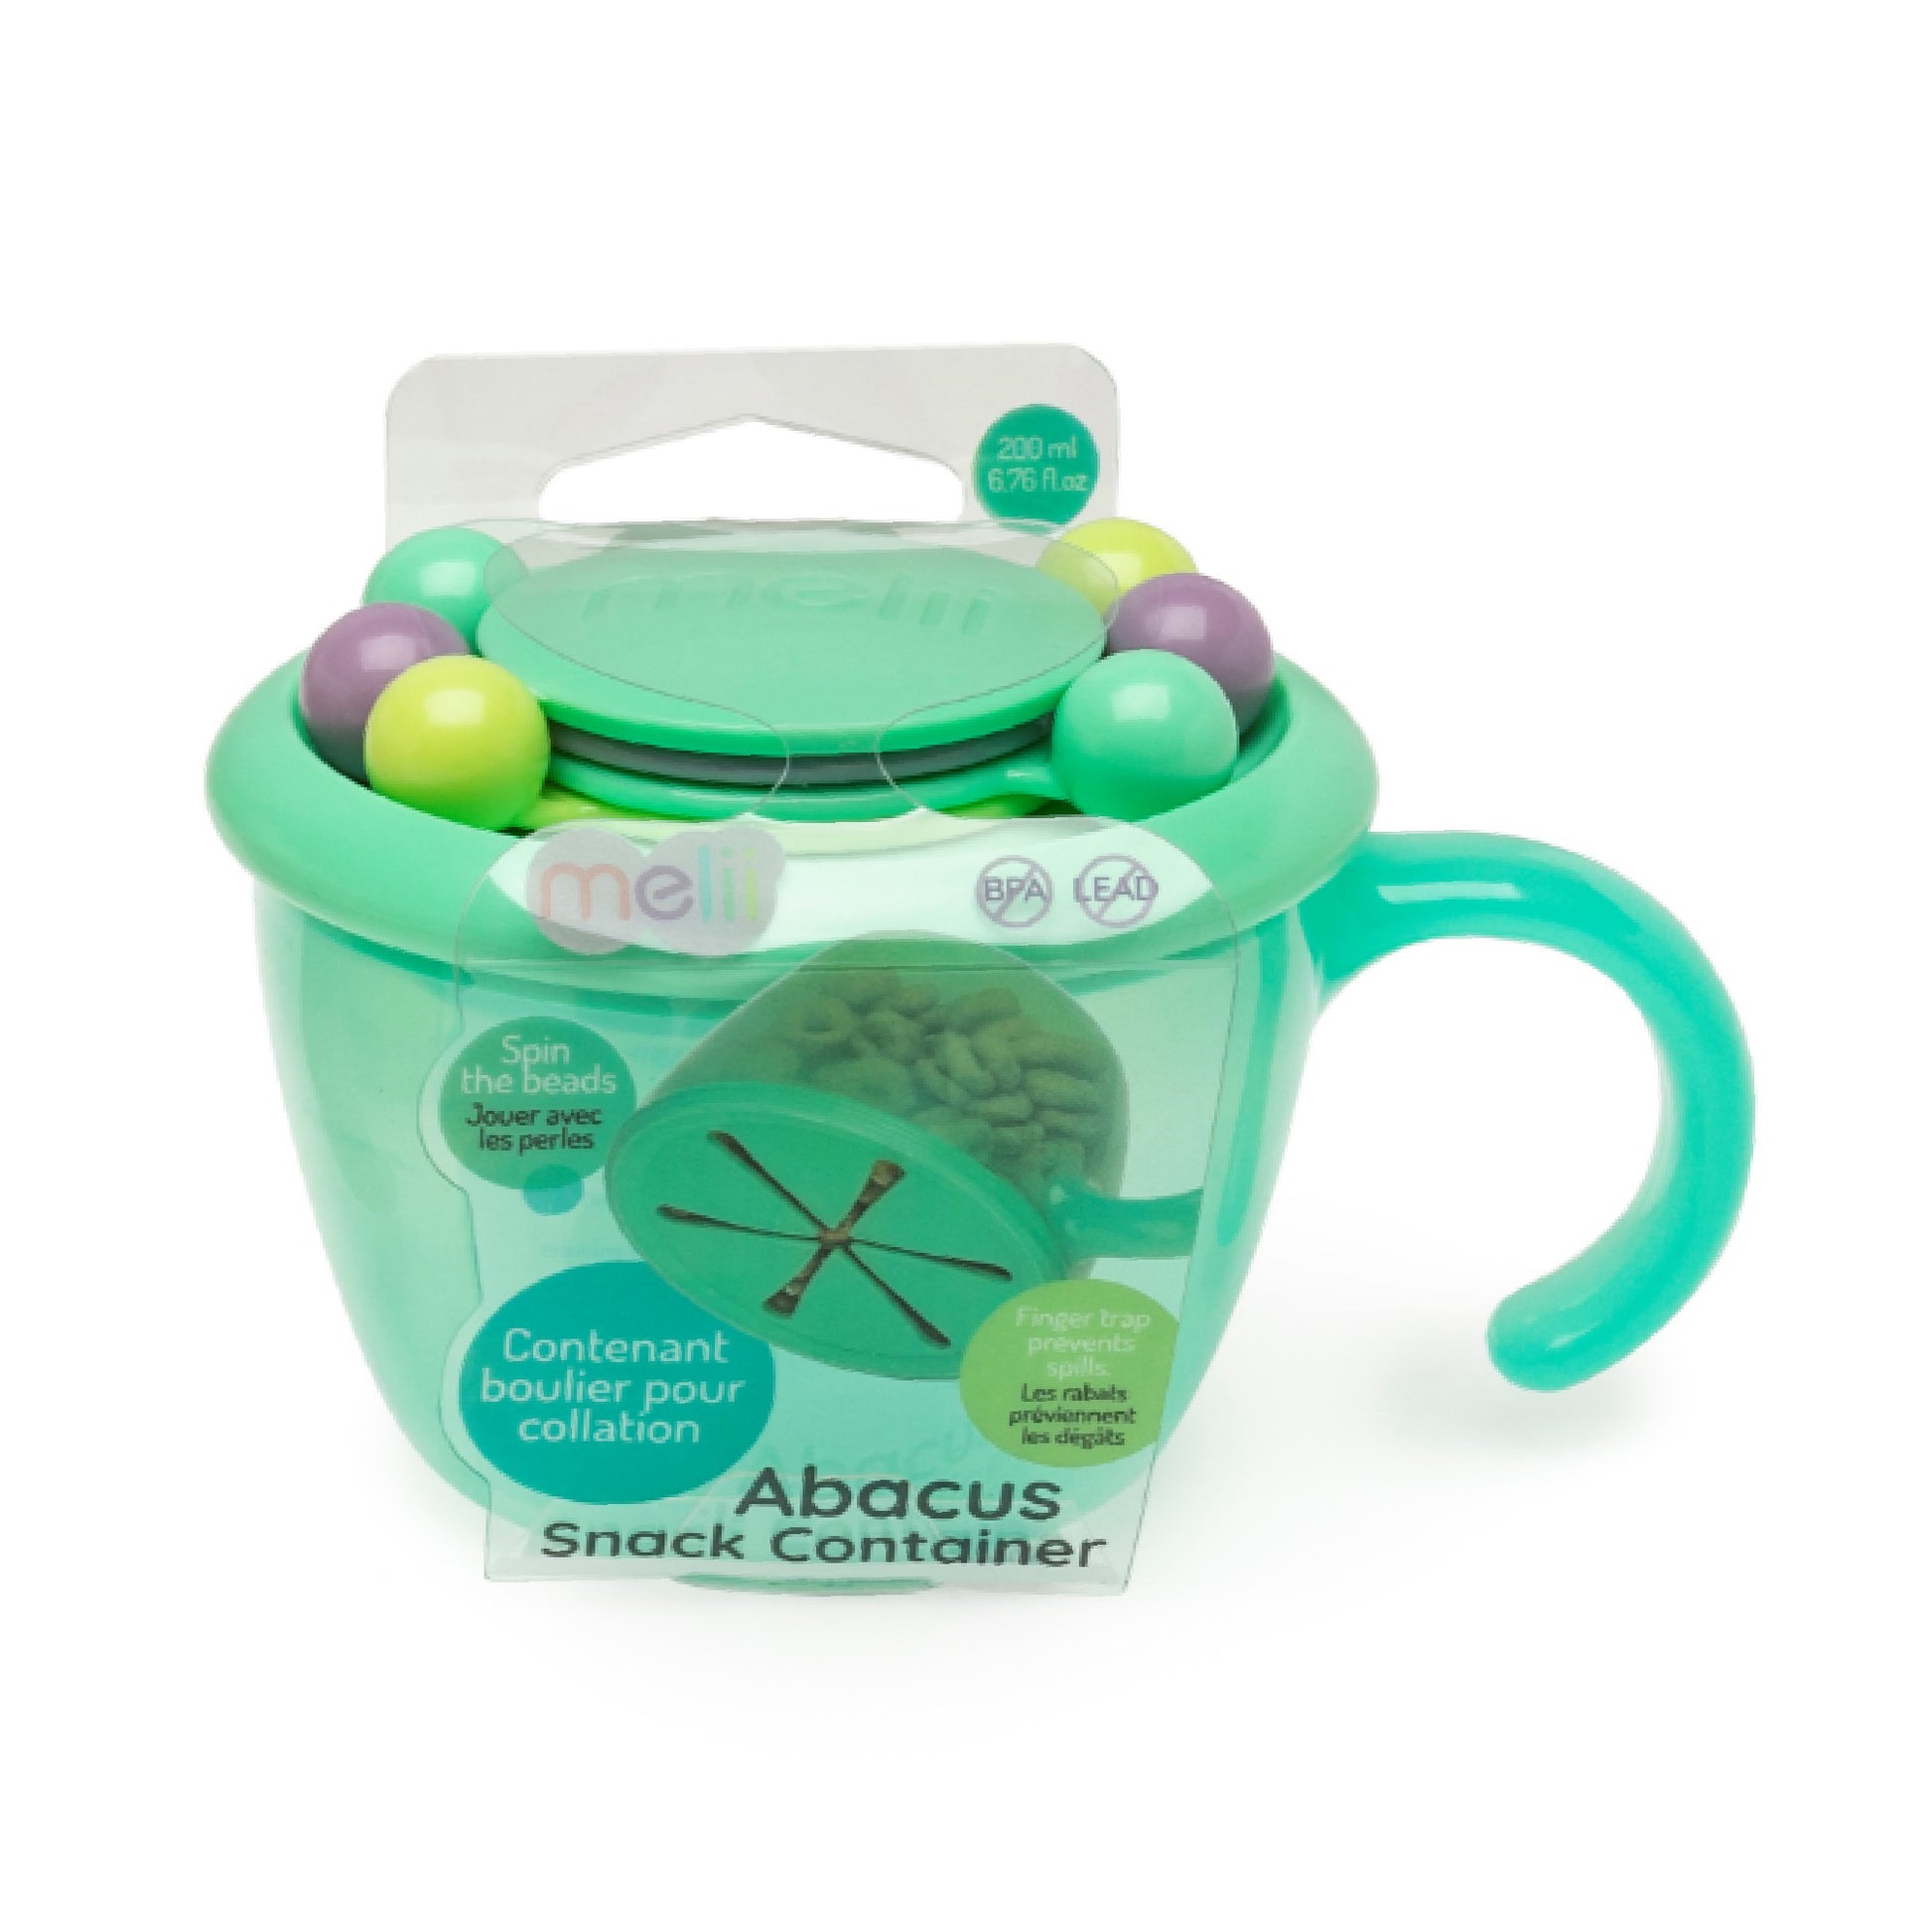 melii Snack Container - Safe, Spill-Proof, and Playful Food Storage with Educational Beads for Babies, Toddlers, and Kids - BPA-Free & Versatile Snacking Solution